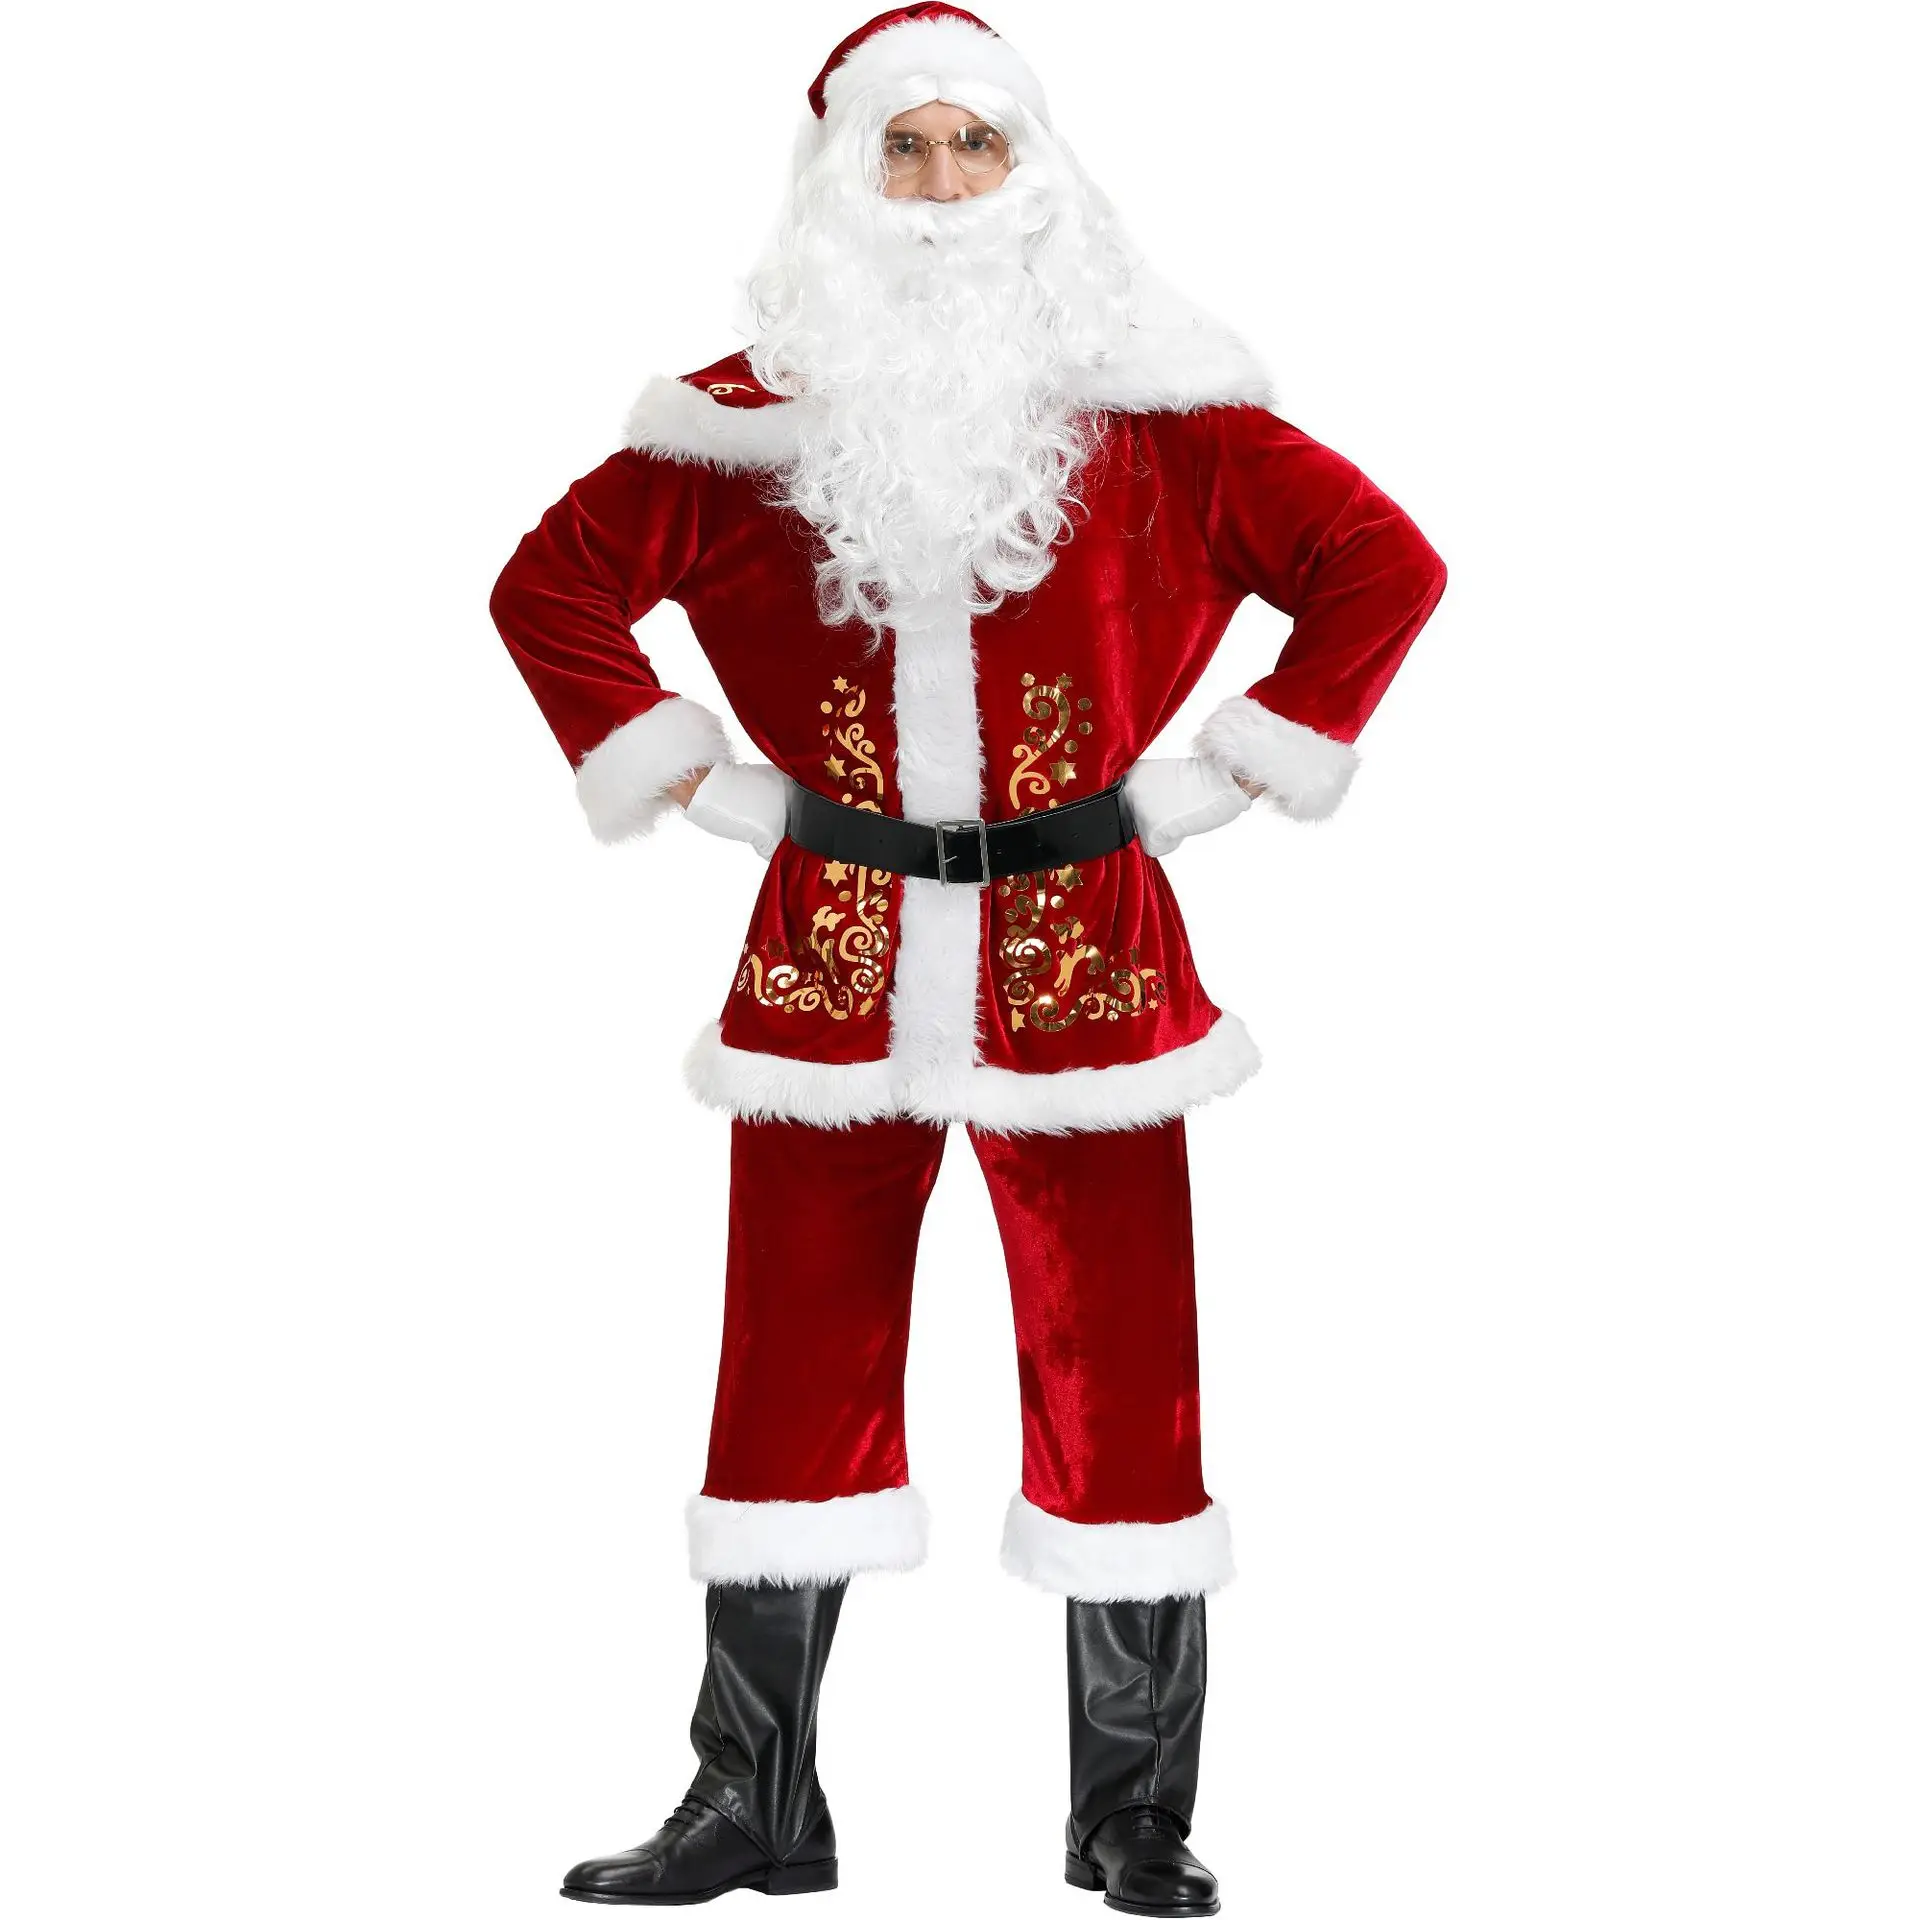 Adult Christmas Santa Claus Cosplay Suit Costume Fancy Dress Party Outfit Xmas 